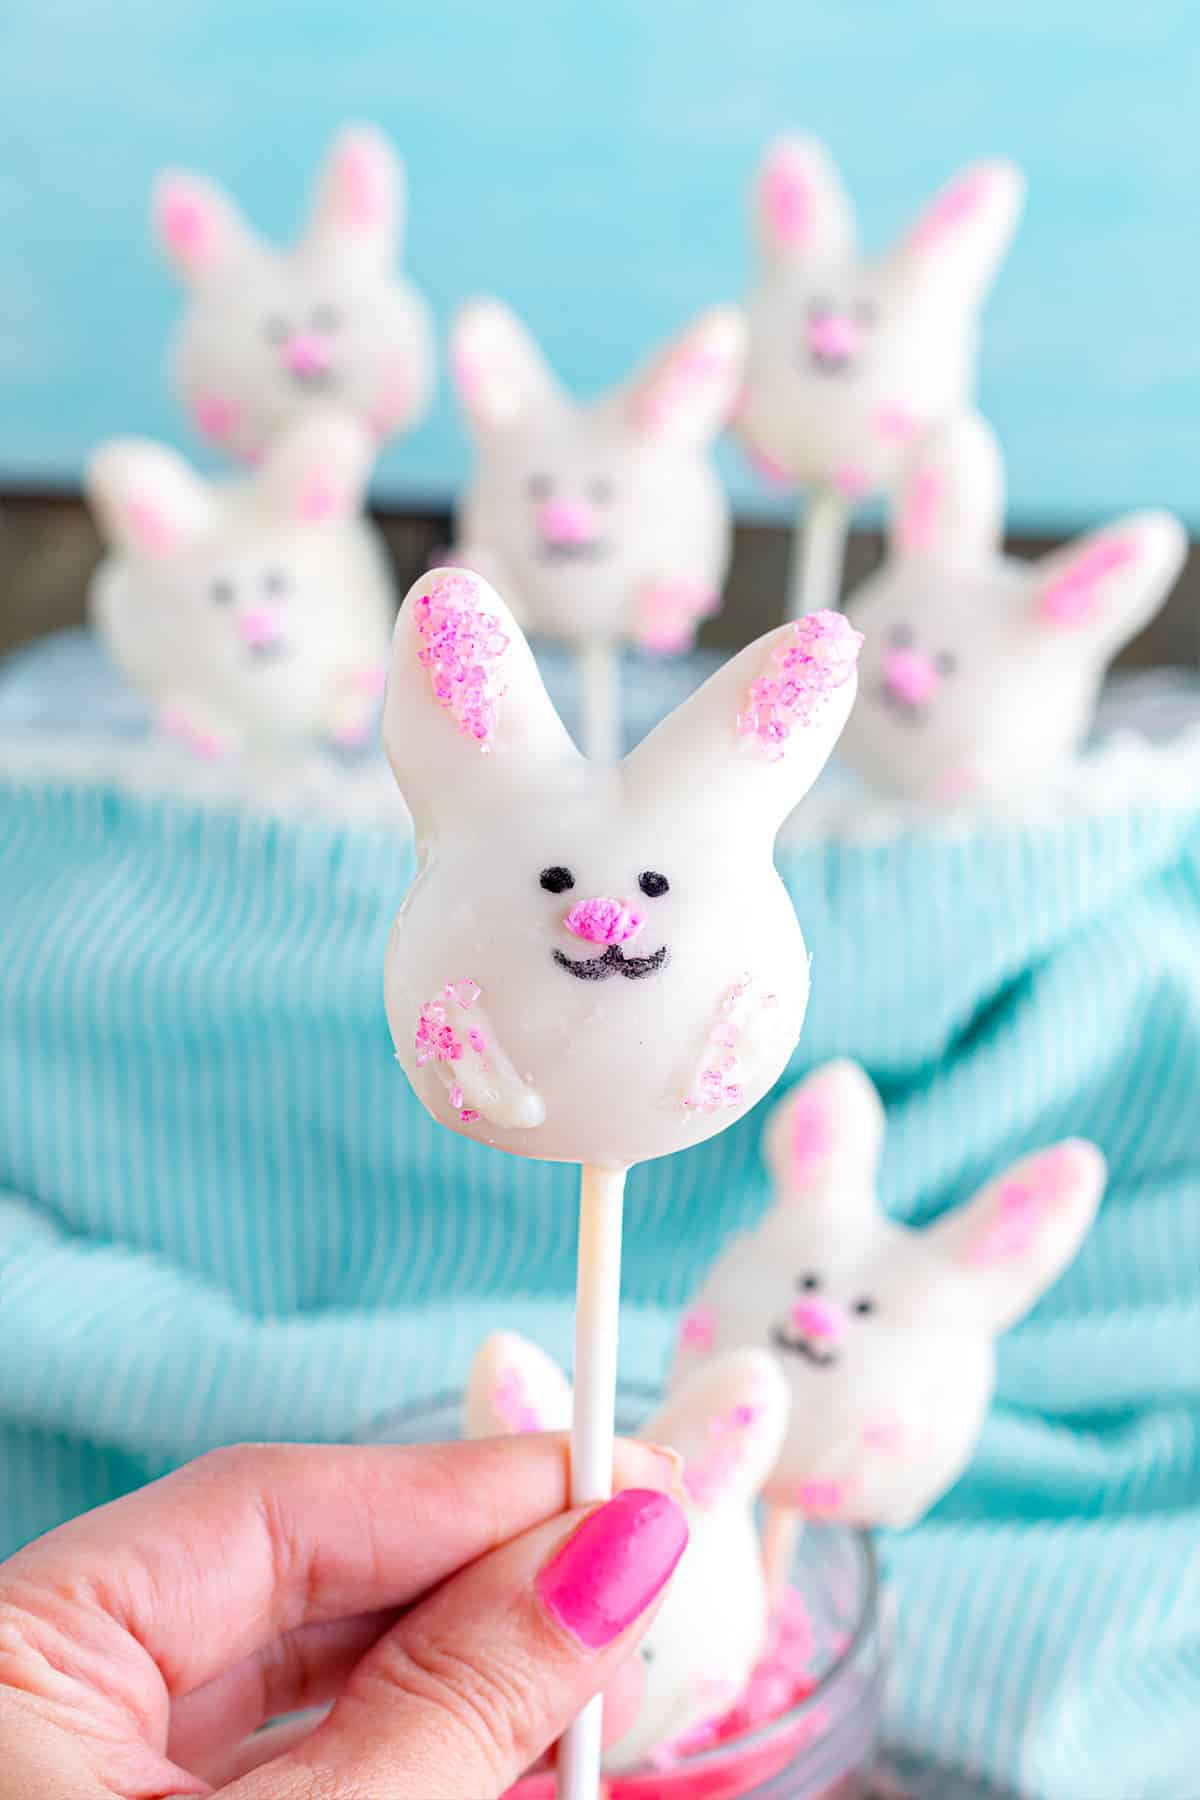 A hand holding up a single bunny cake pop to show what it looks like.